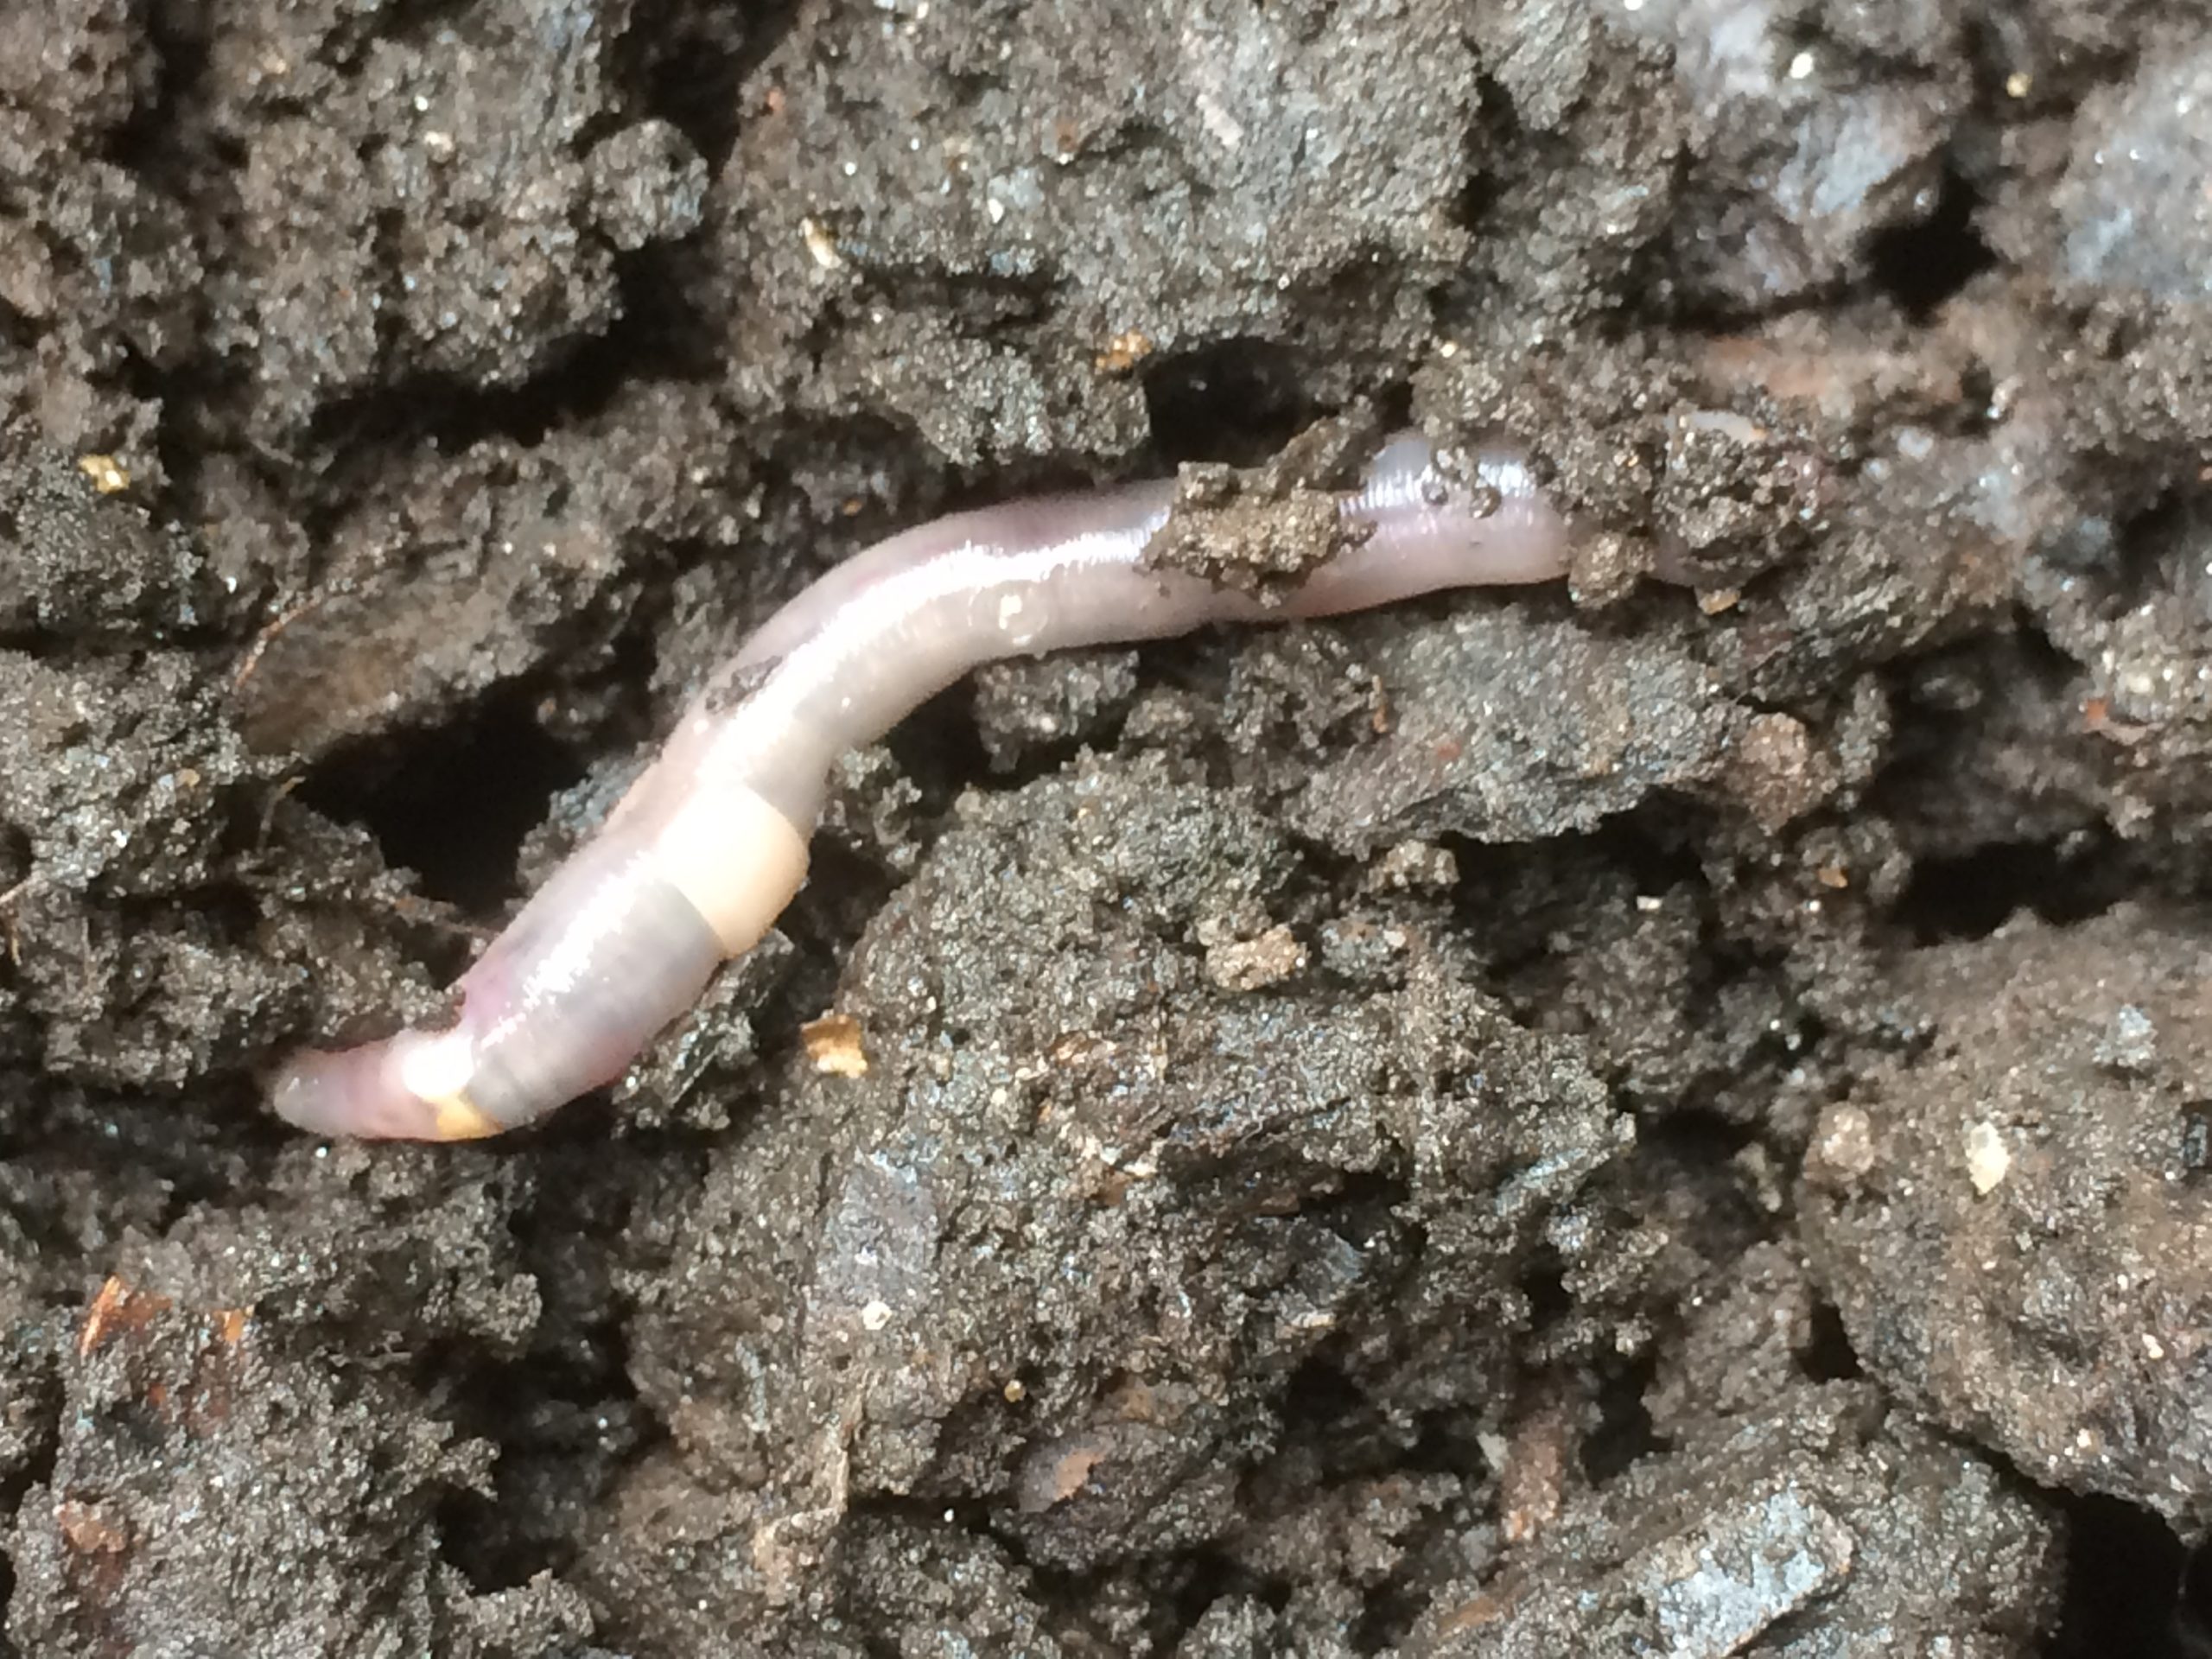 Earth (Day) Worms